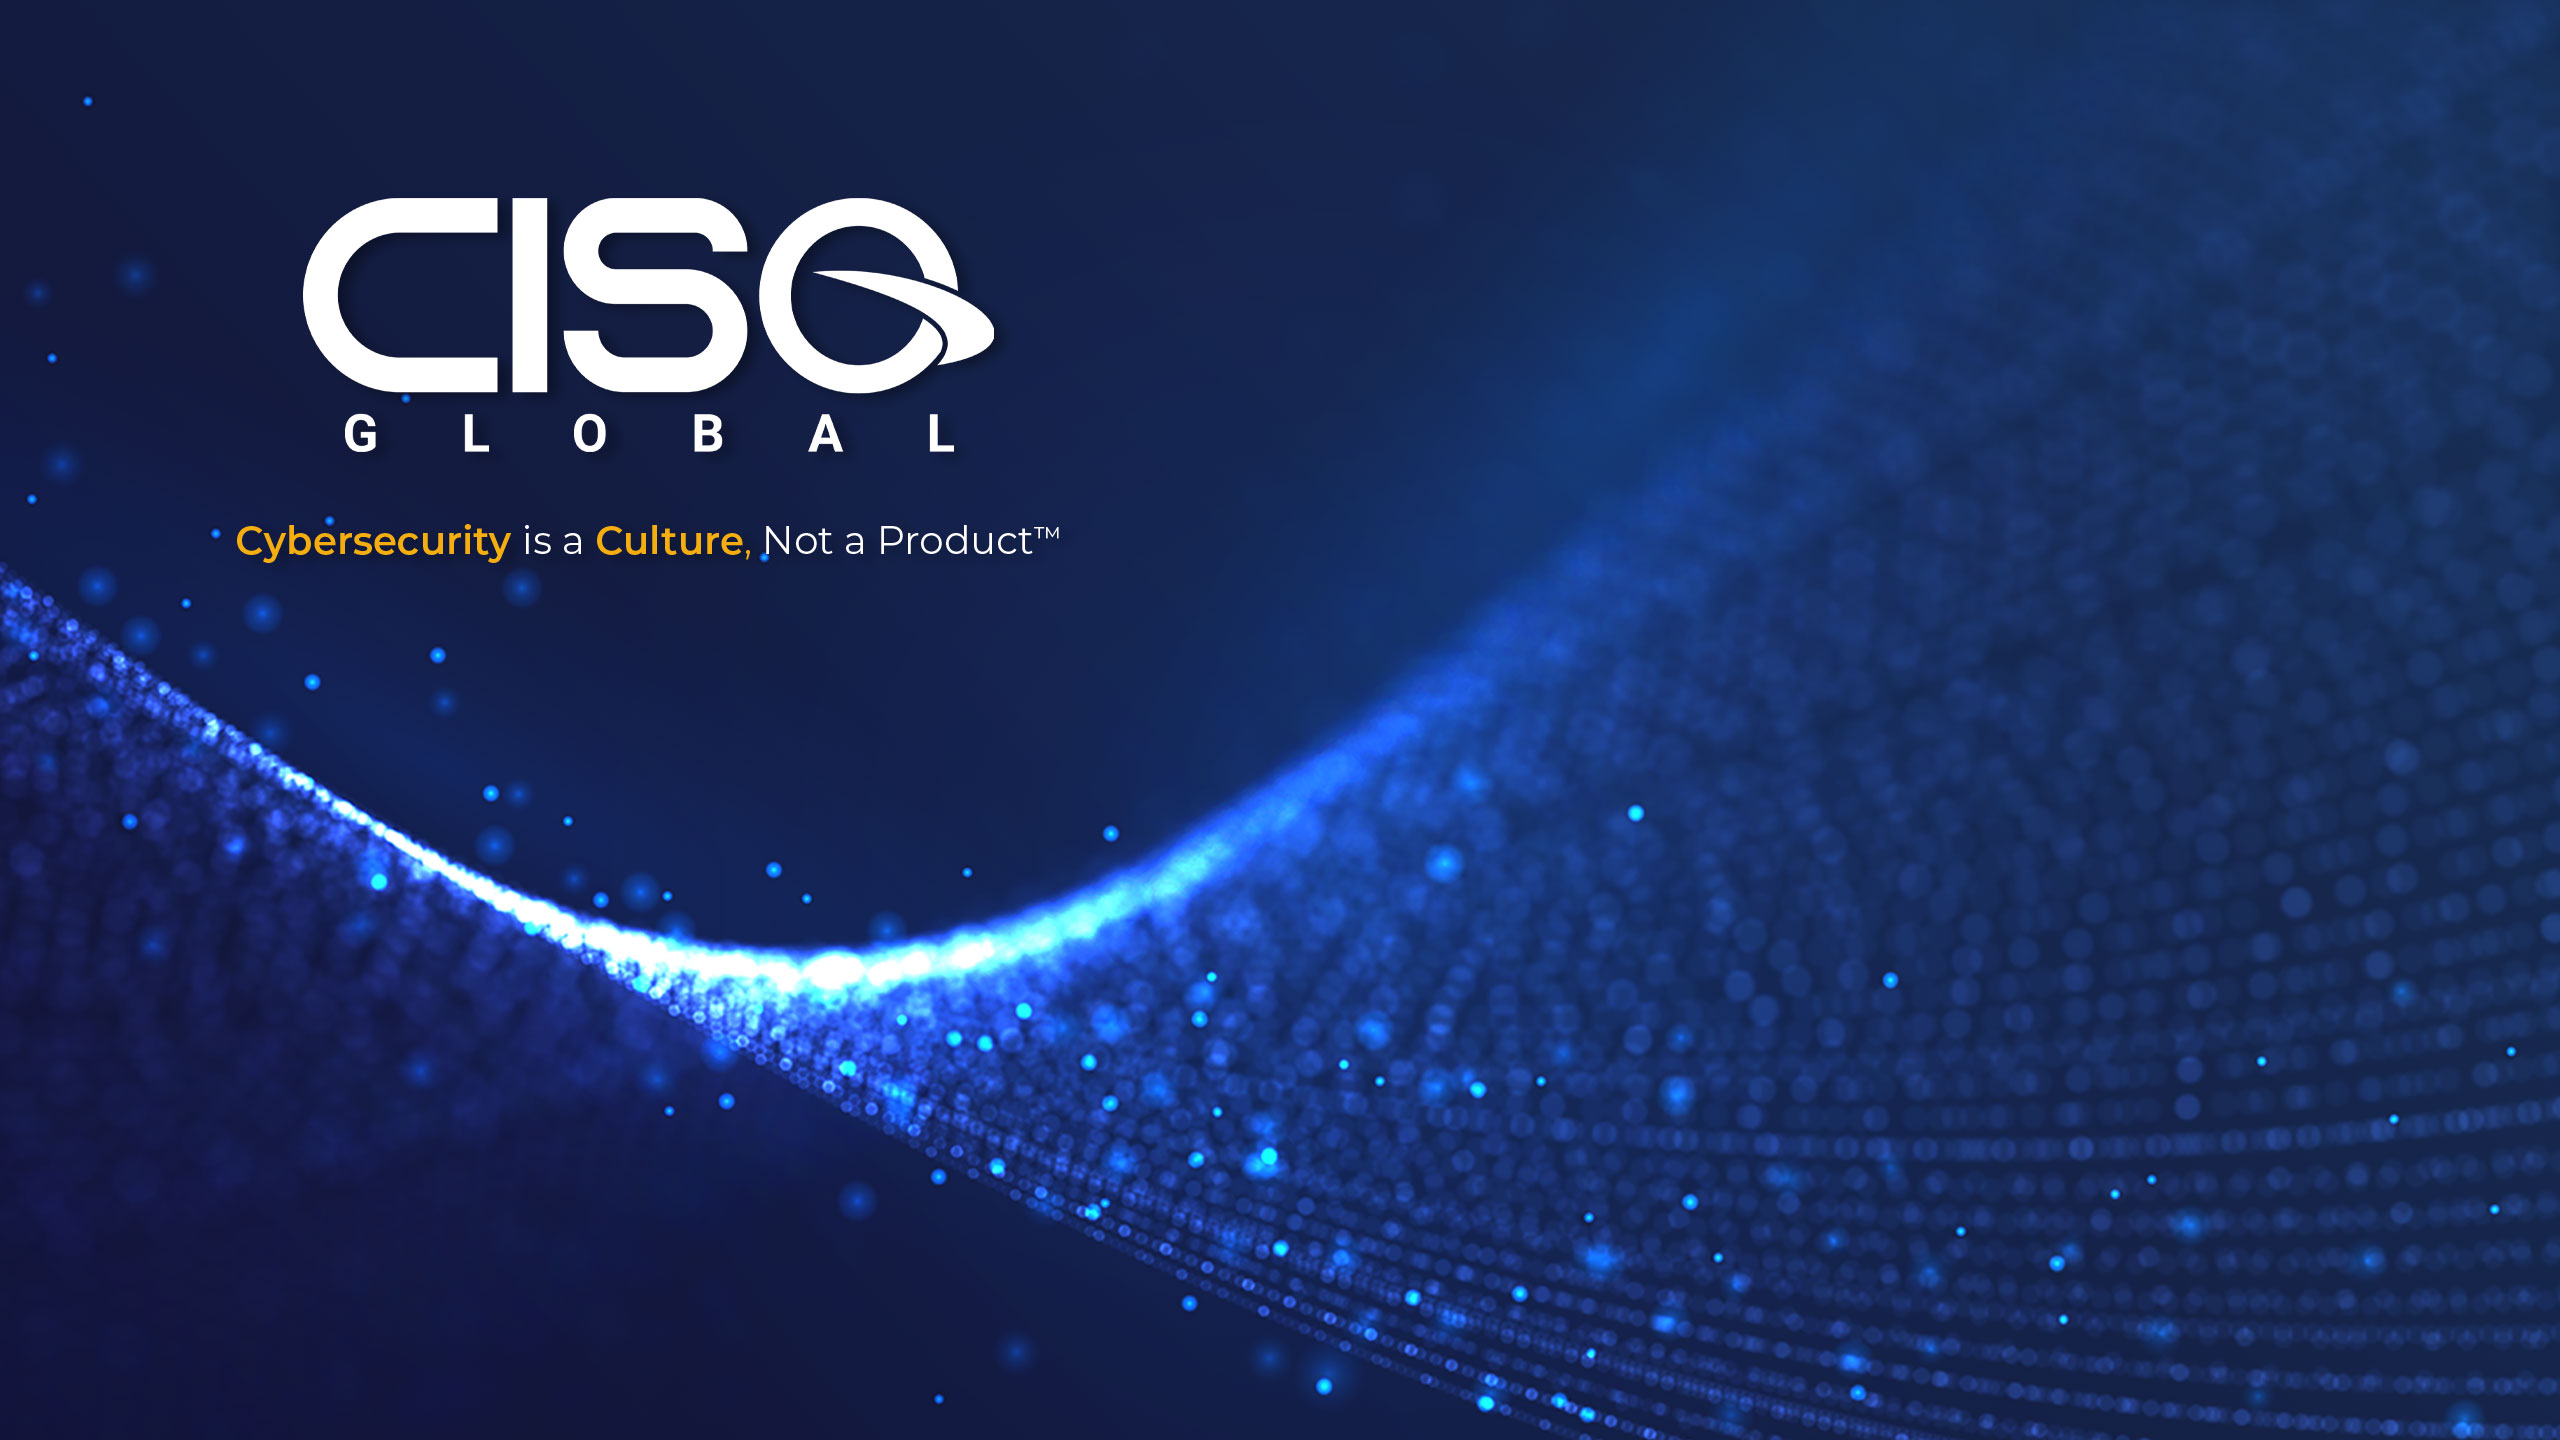 In Focus: CISO Global's Cybersecurity Solutions Are So Robust, They Come With A $250,000 Guaranty of Protection ($CISO)